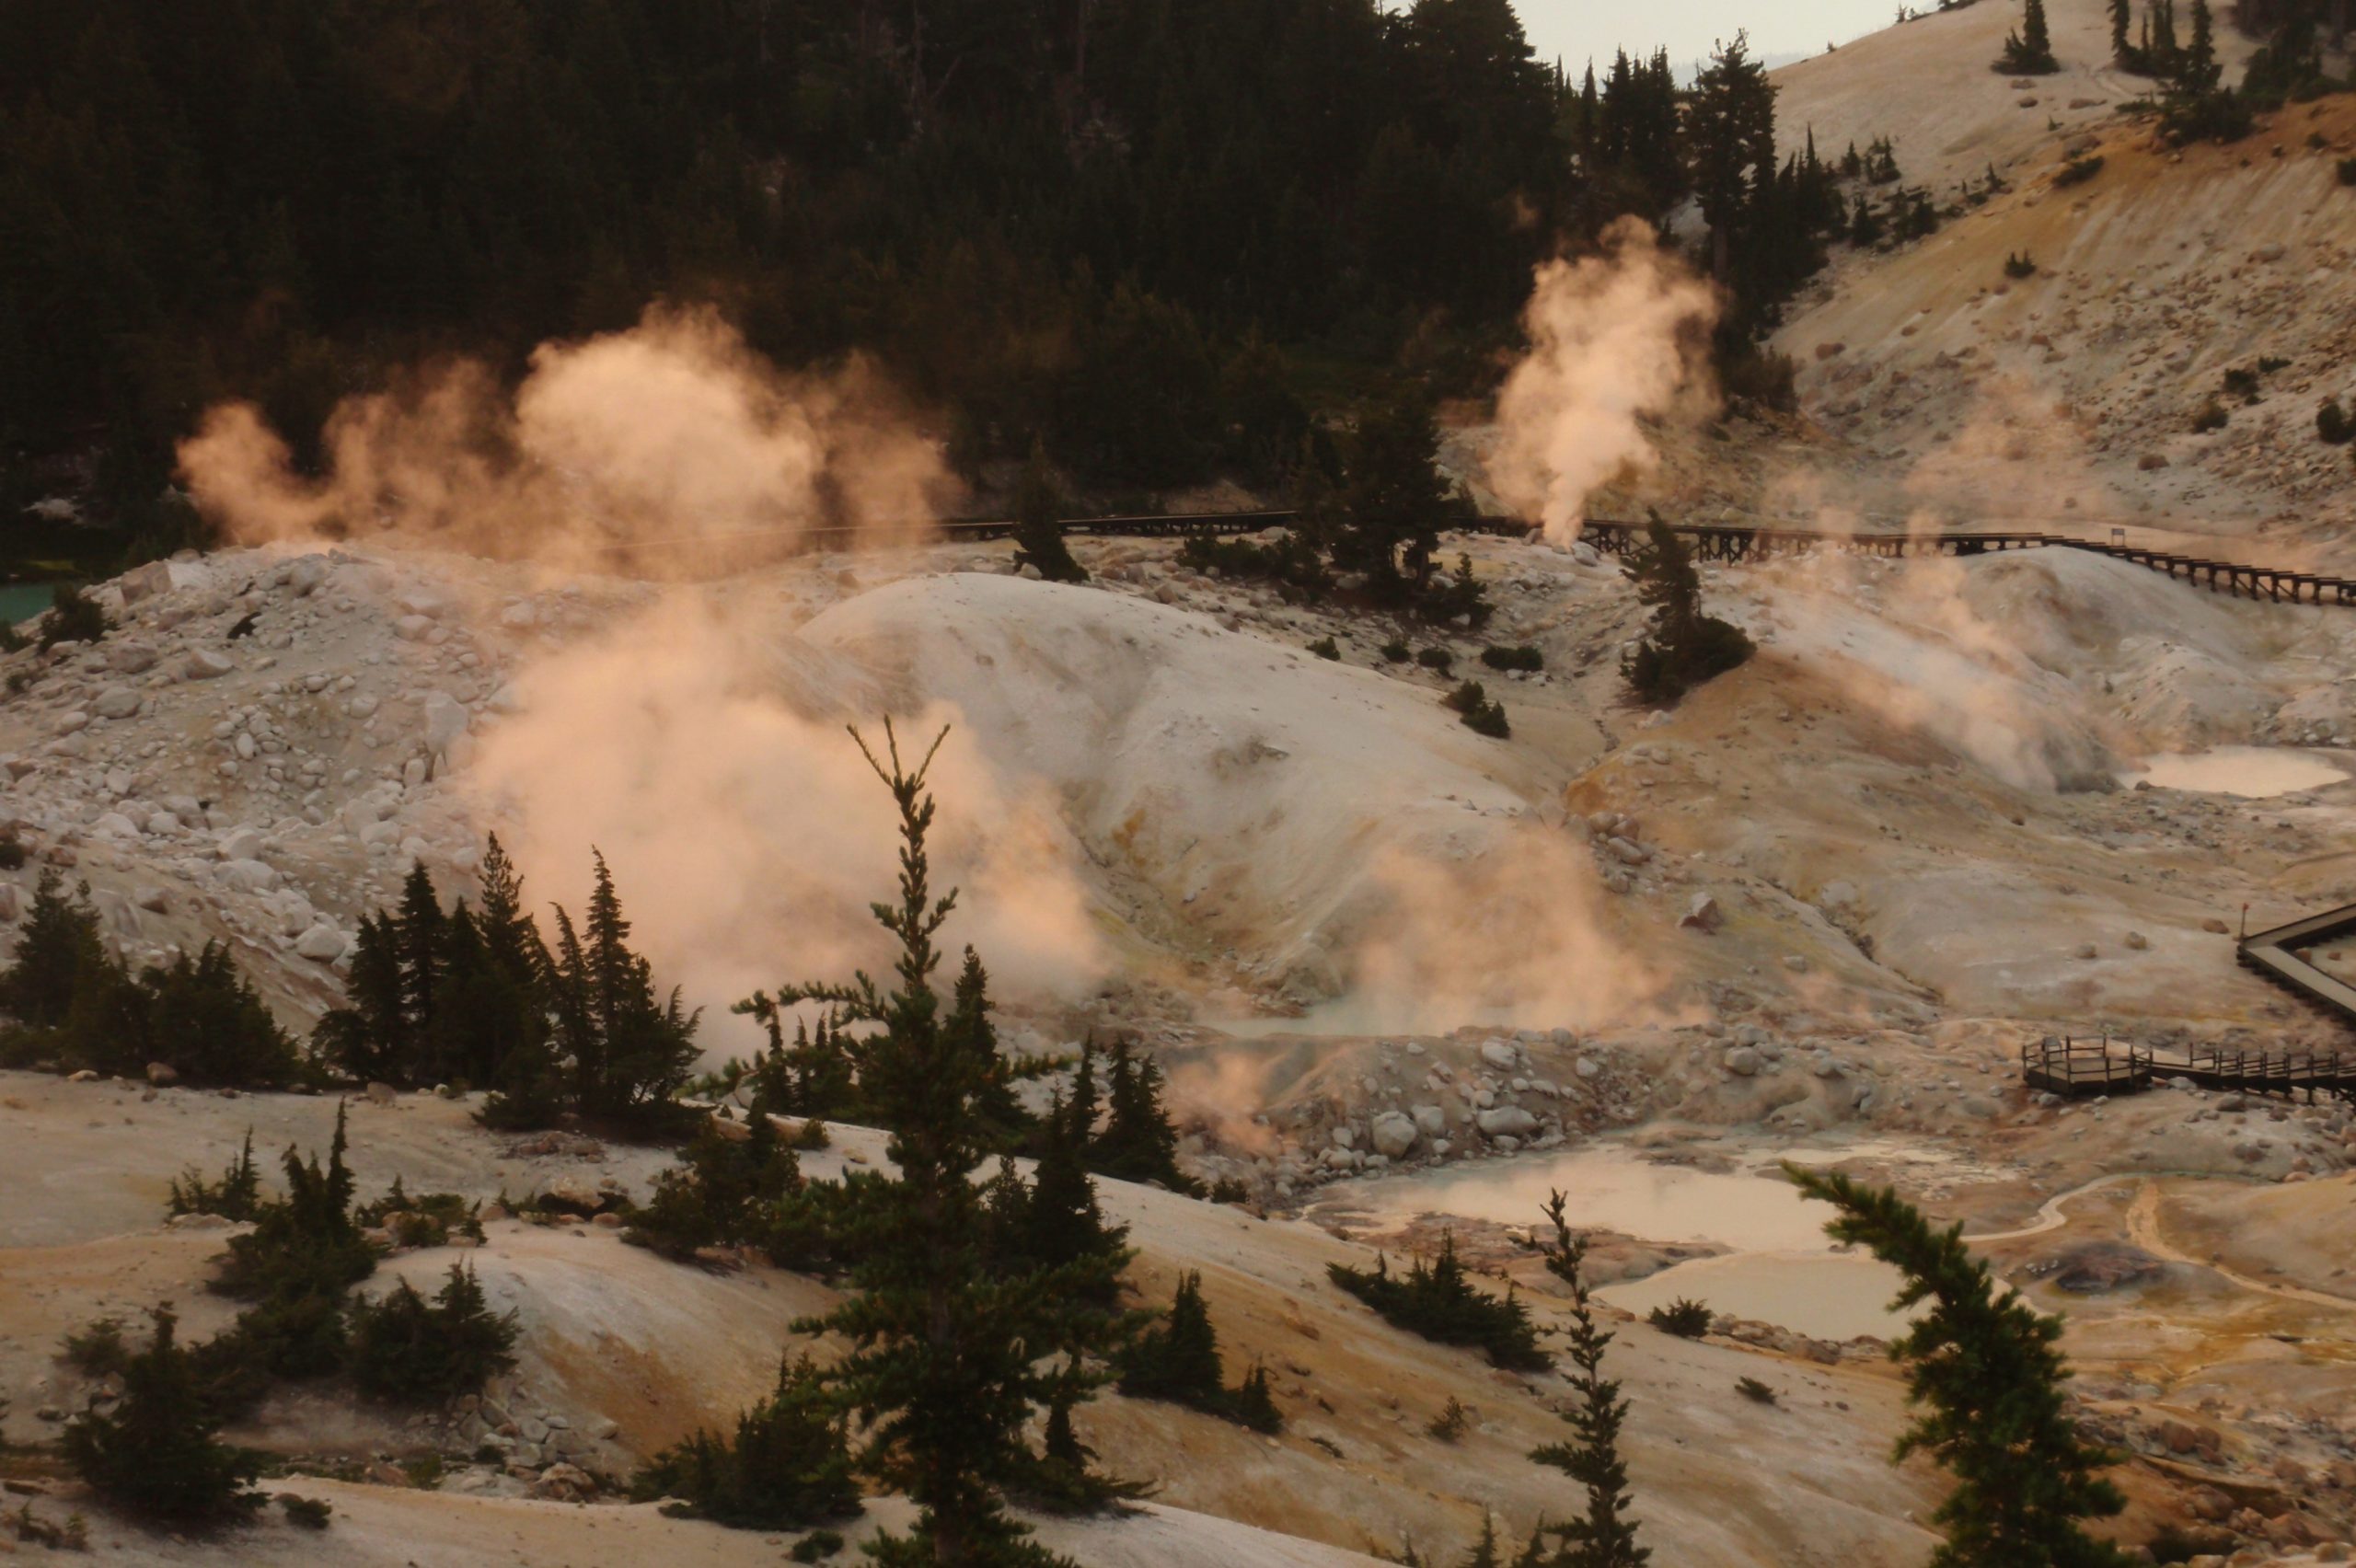 Hot Water” in Lassen Volcanic National Park— Fumaroles, Steaming Ground,  and Boiling Mudpots